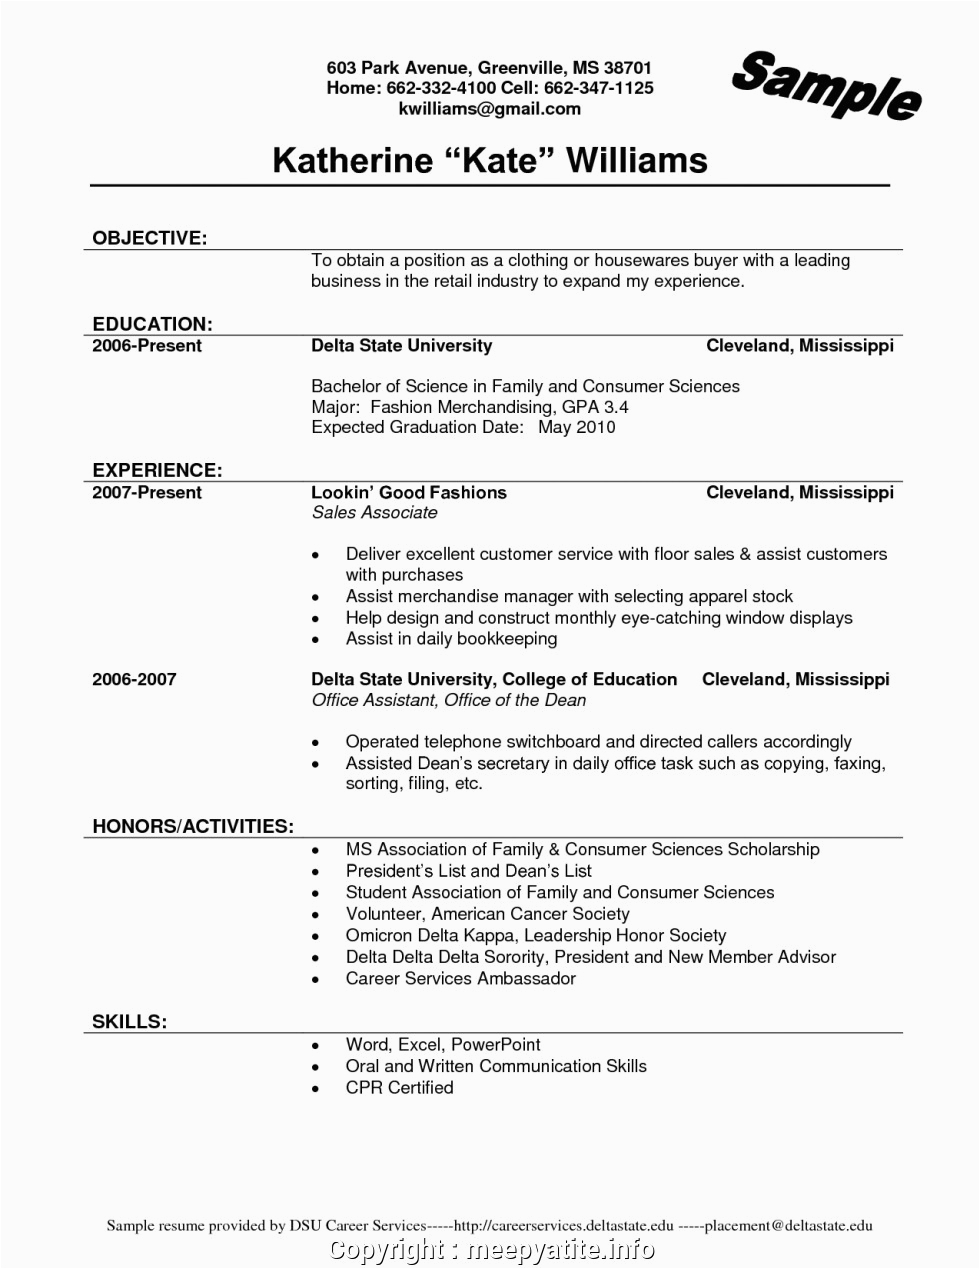 Sample Resume for Clothing Store Sales associate Simply Fashion Retail Sales Resume Clothing Store Sales